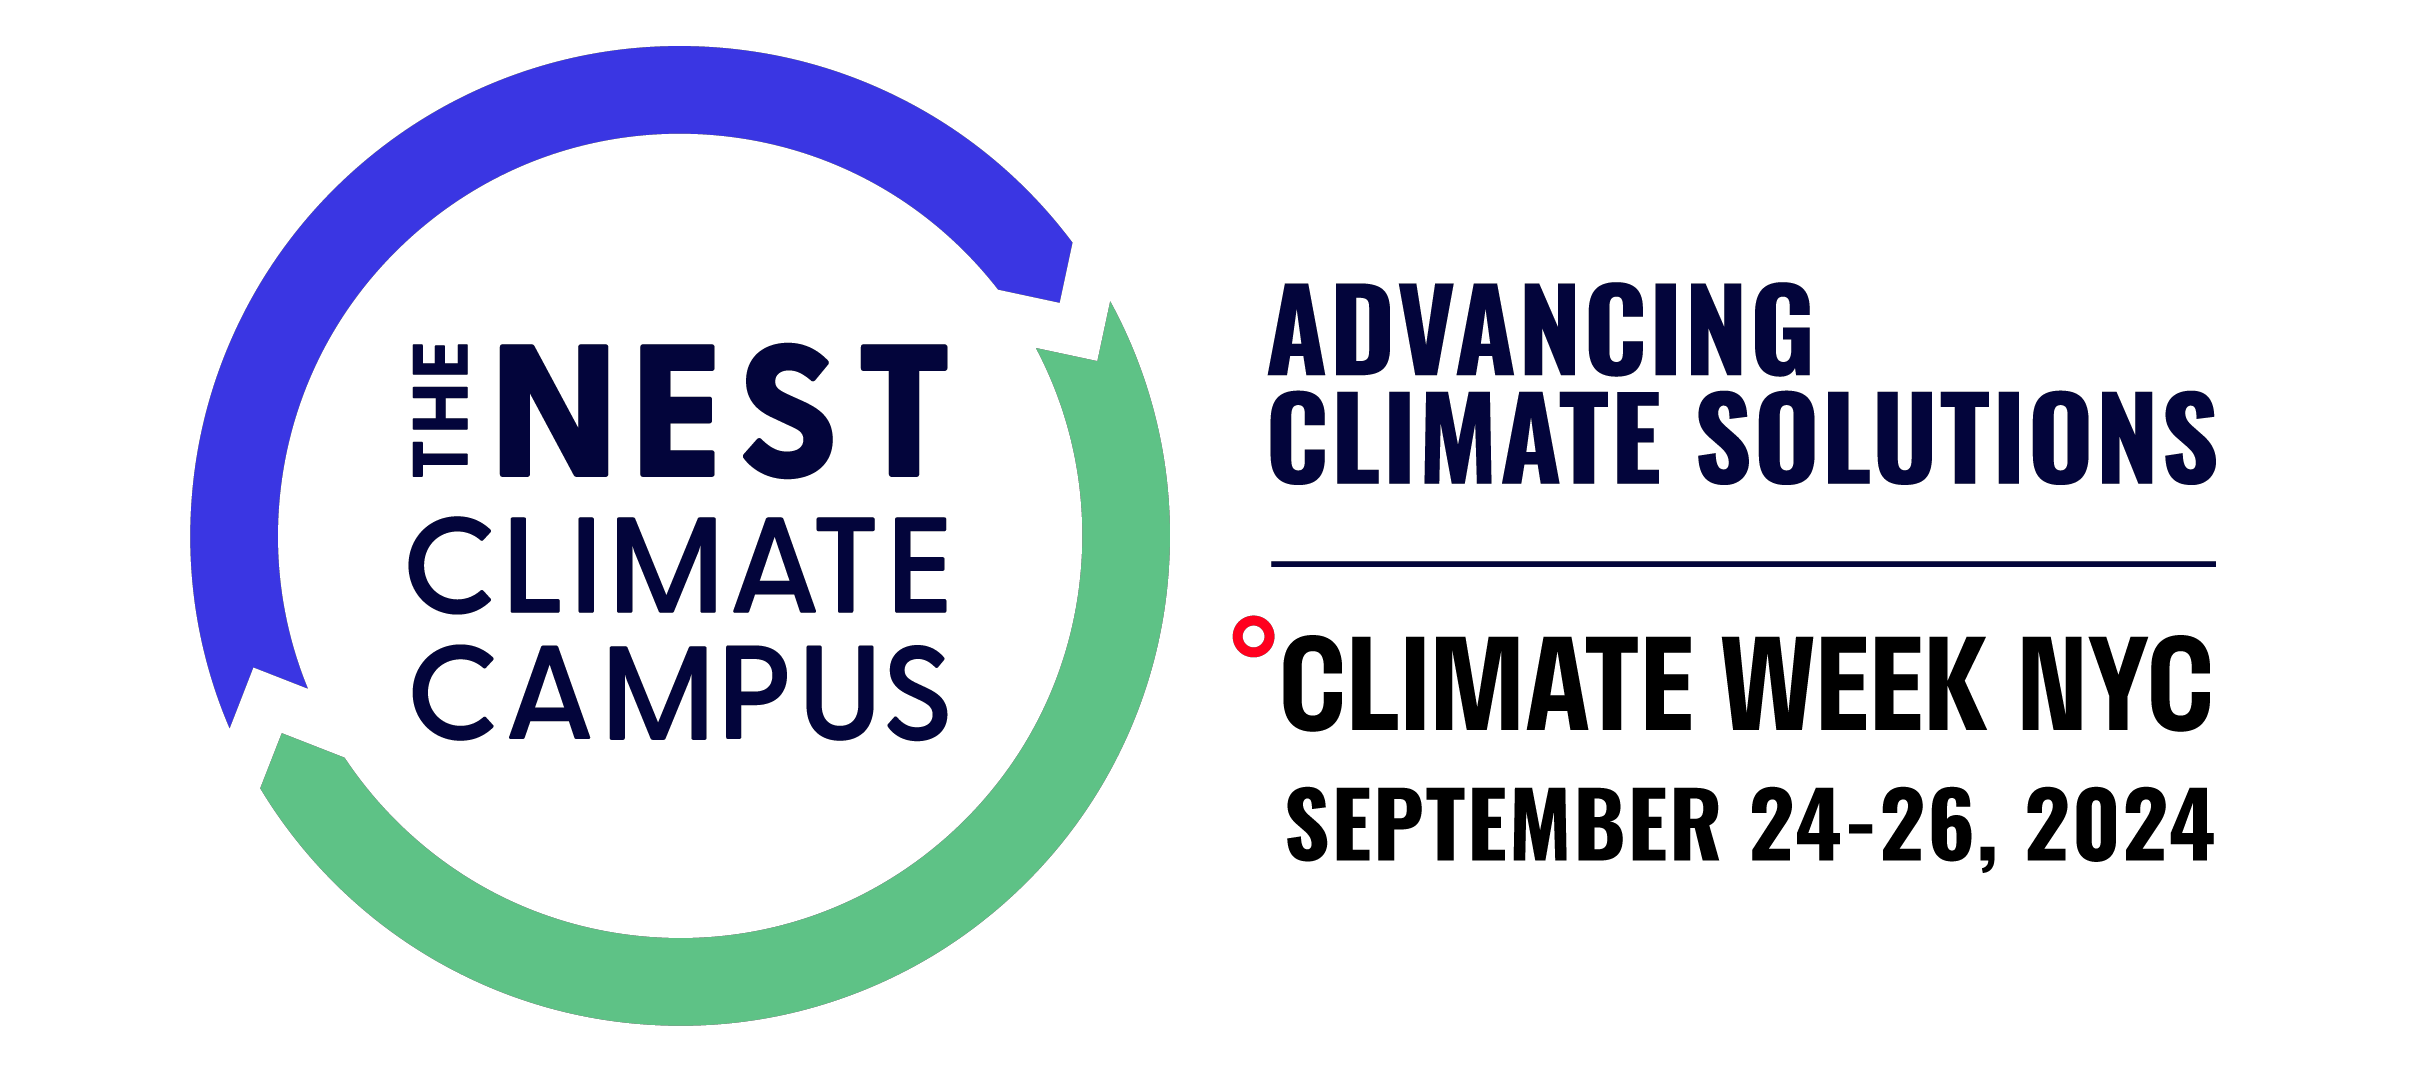 The Nest Climate Campus Logo Climate Week NYC